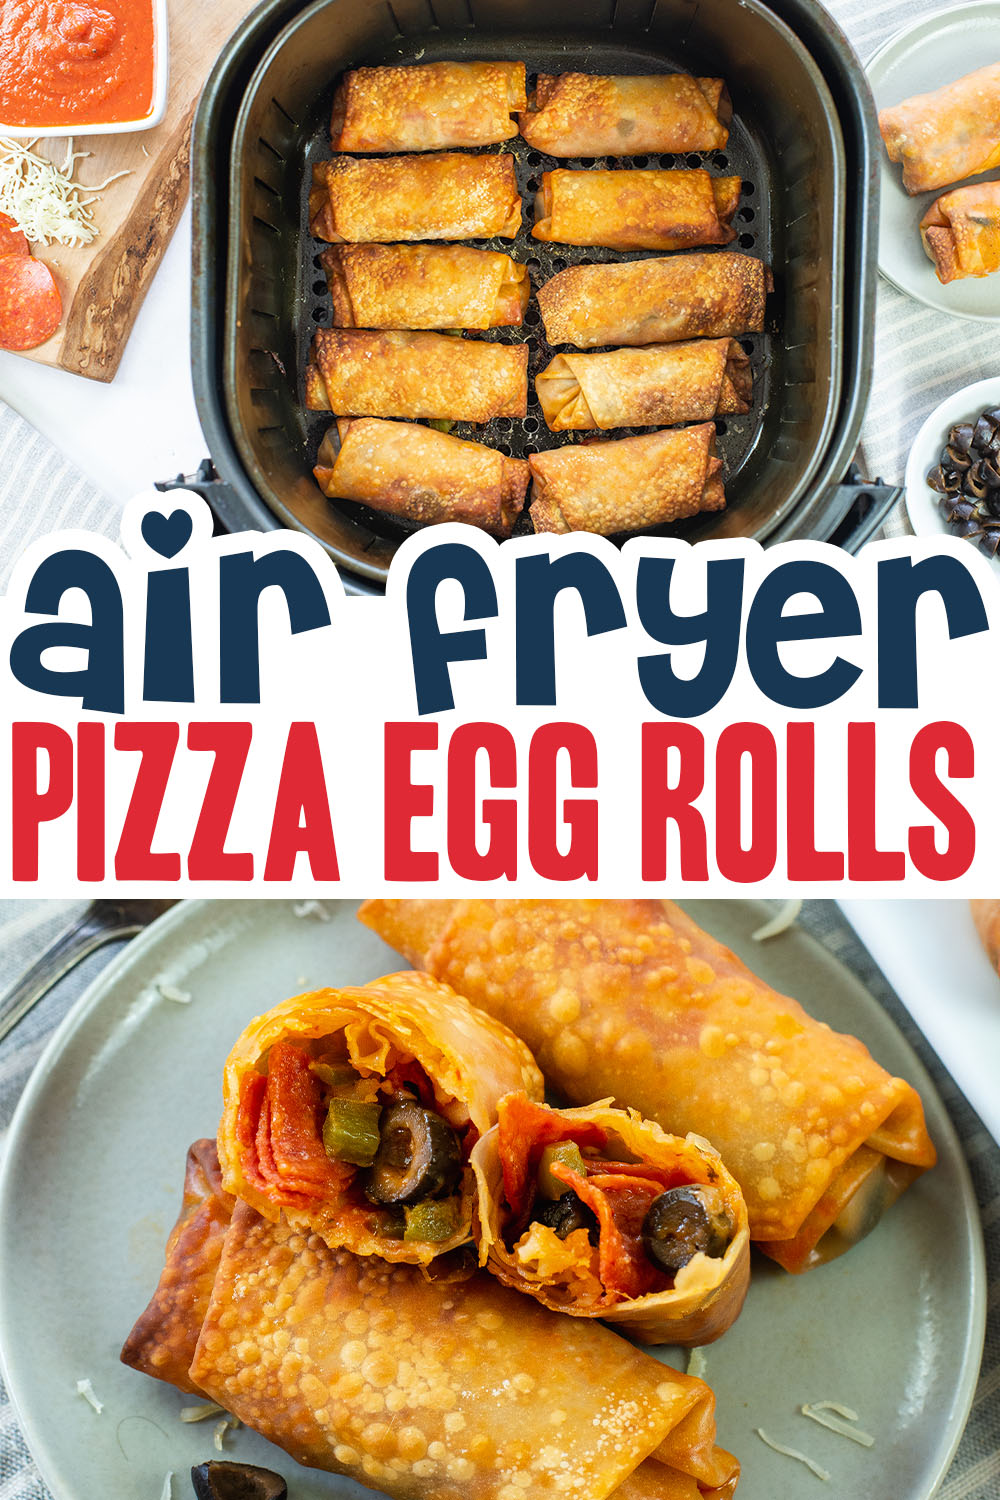 The pizza filling in these crispy egg rolls is perfect for a fun dinner or lunch!